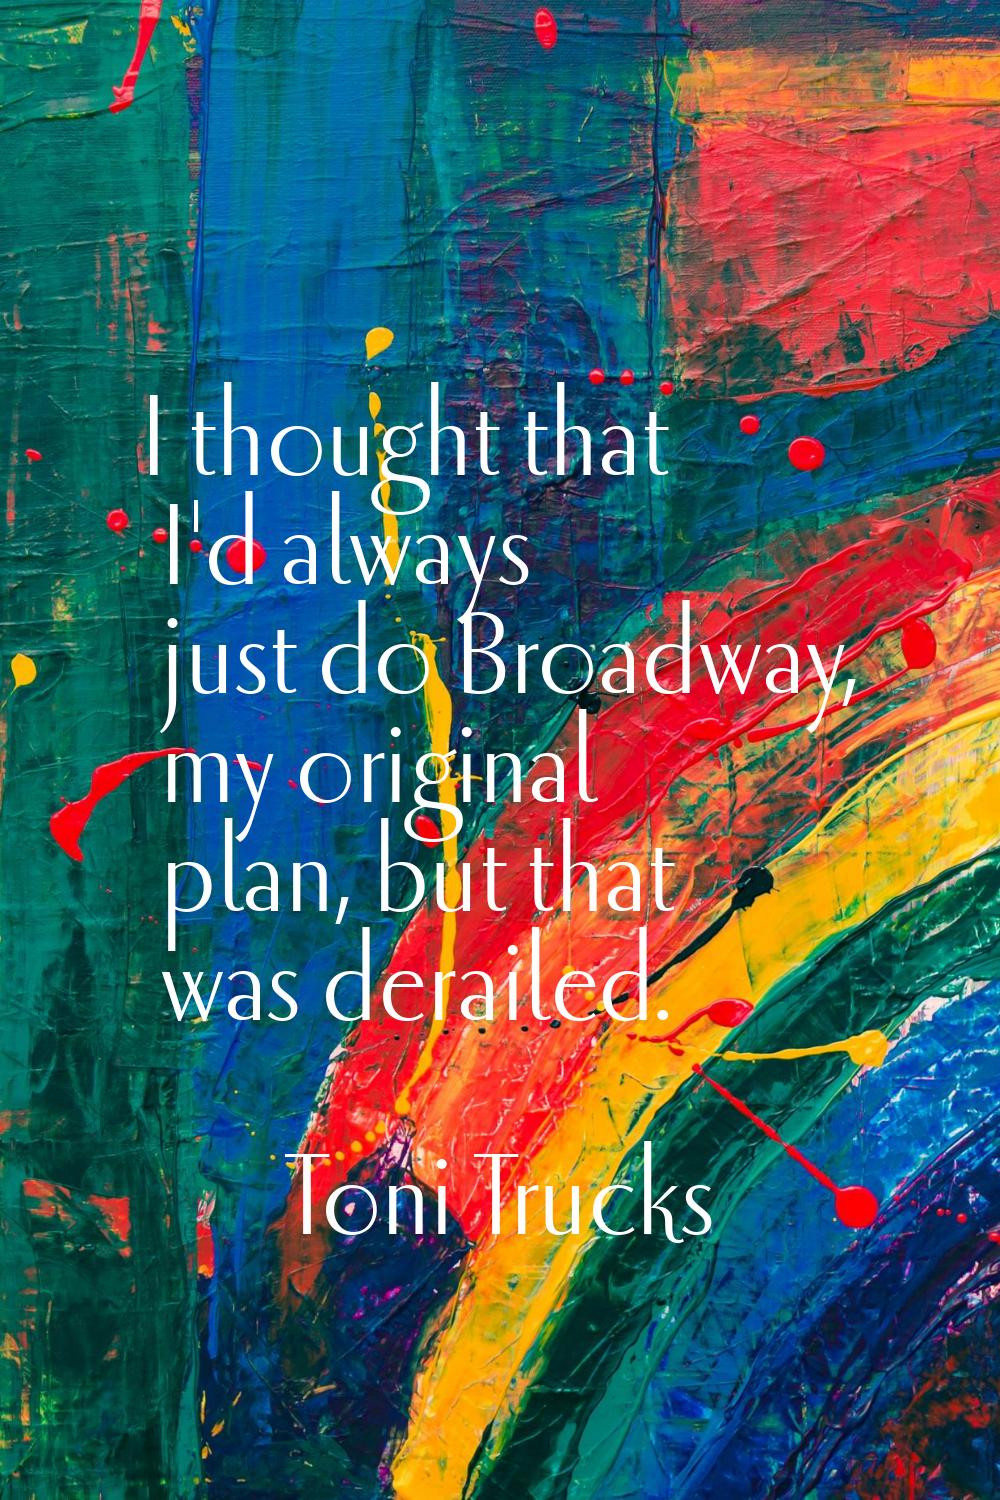 I thought that I'd always just do Broadway, my original plan, but that was derailed.